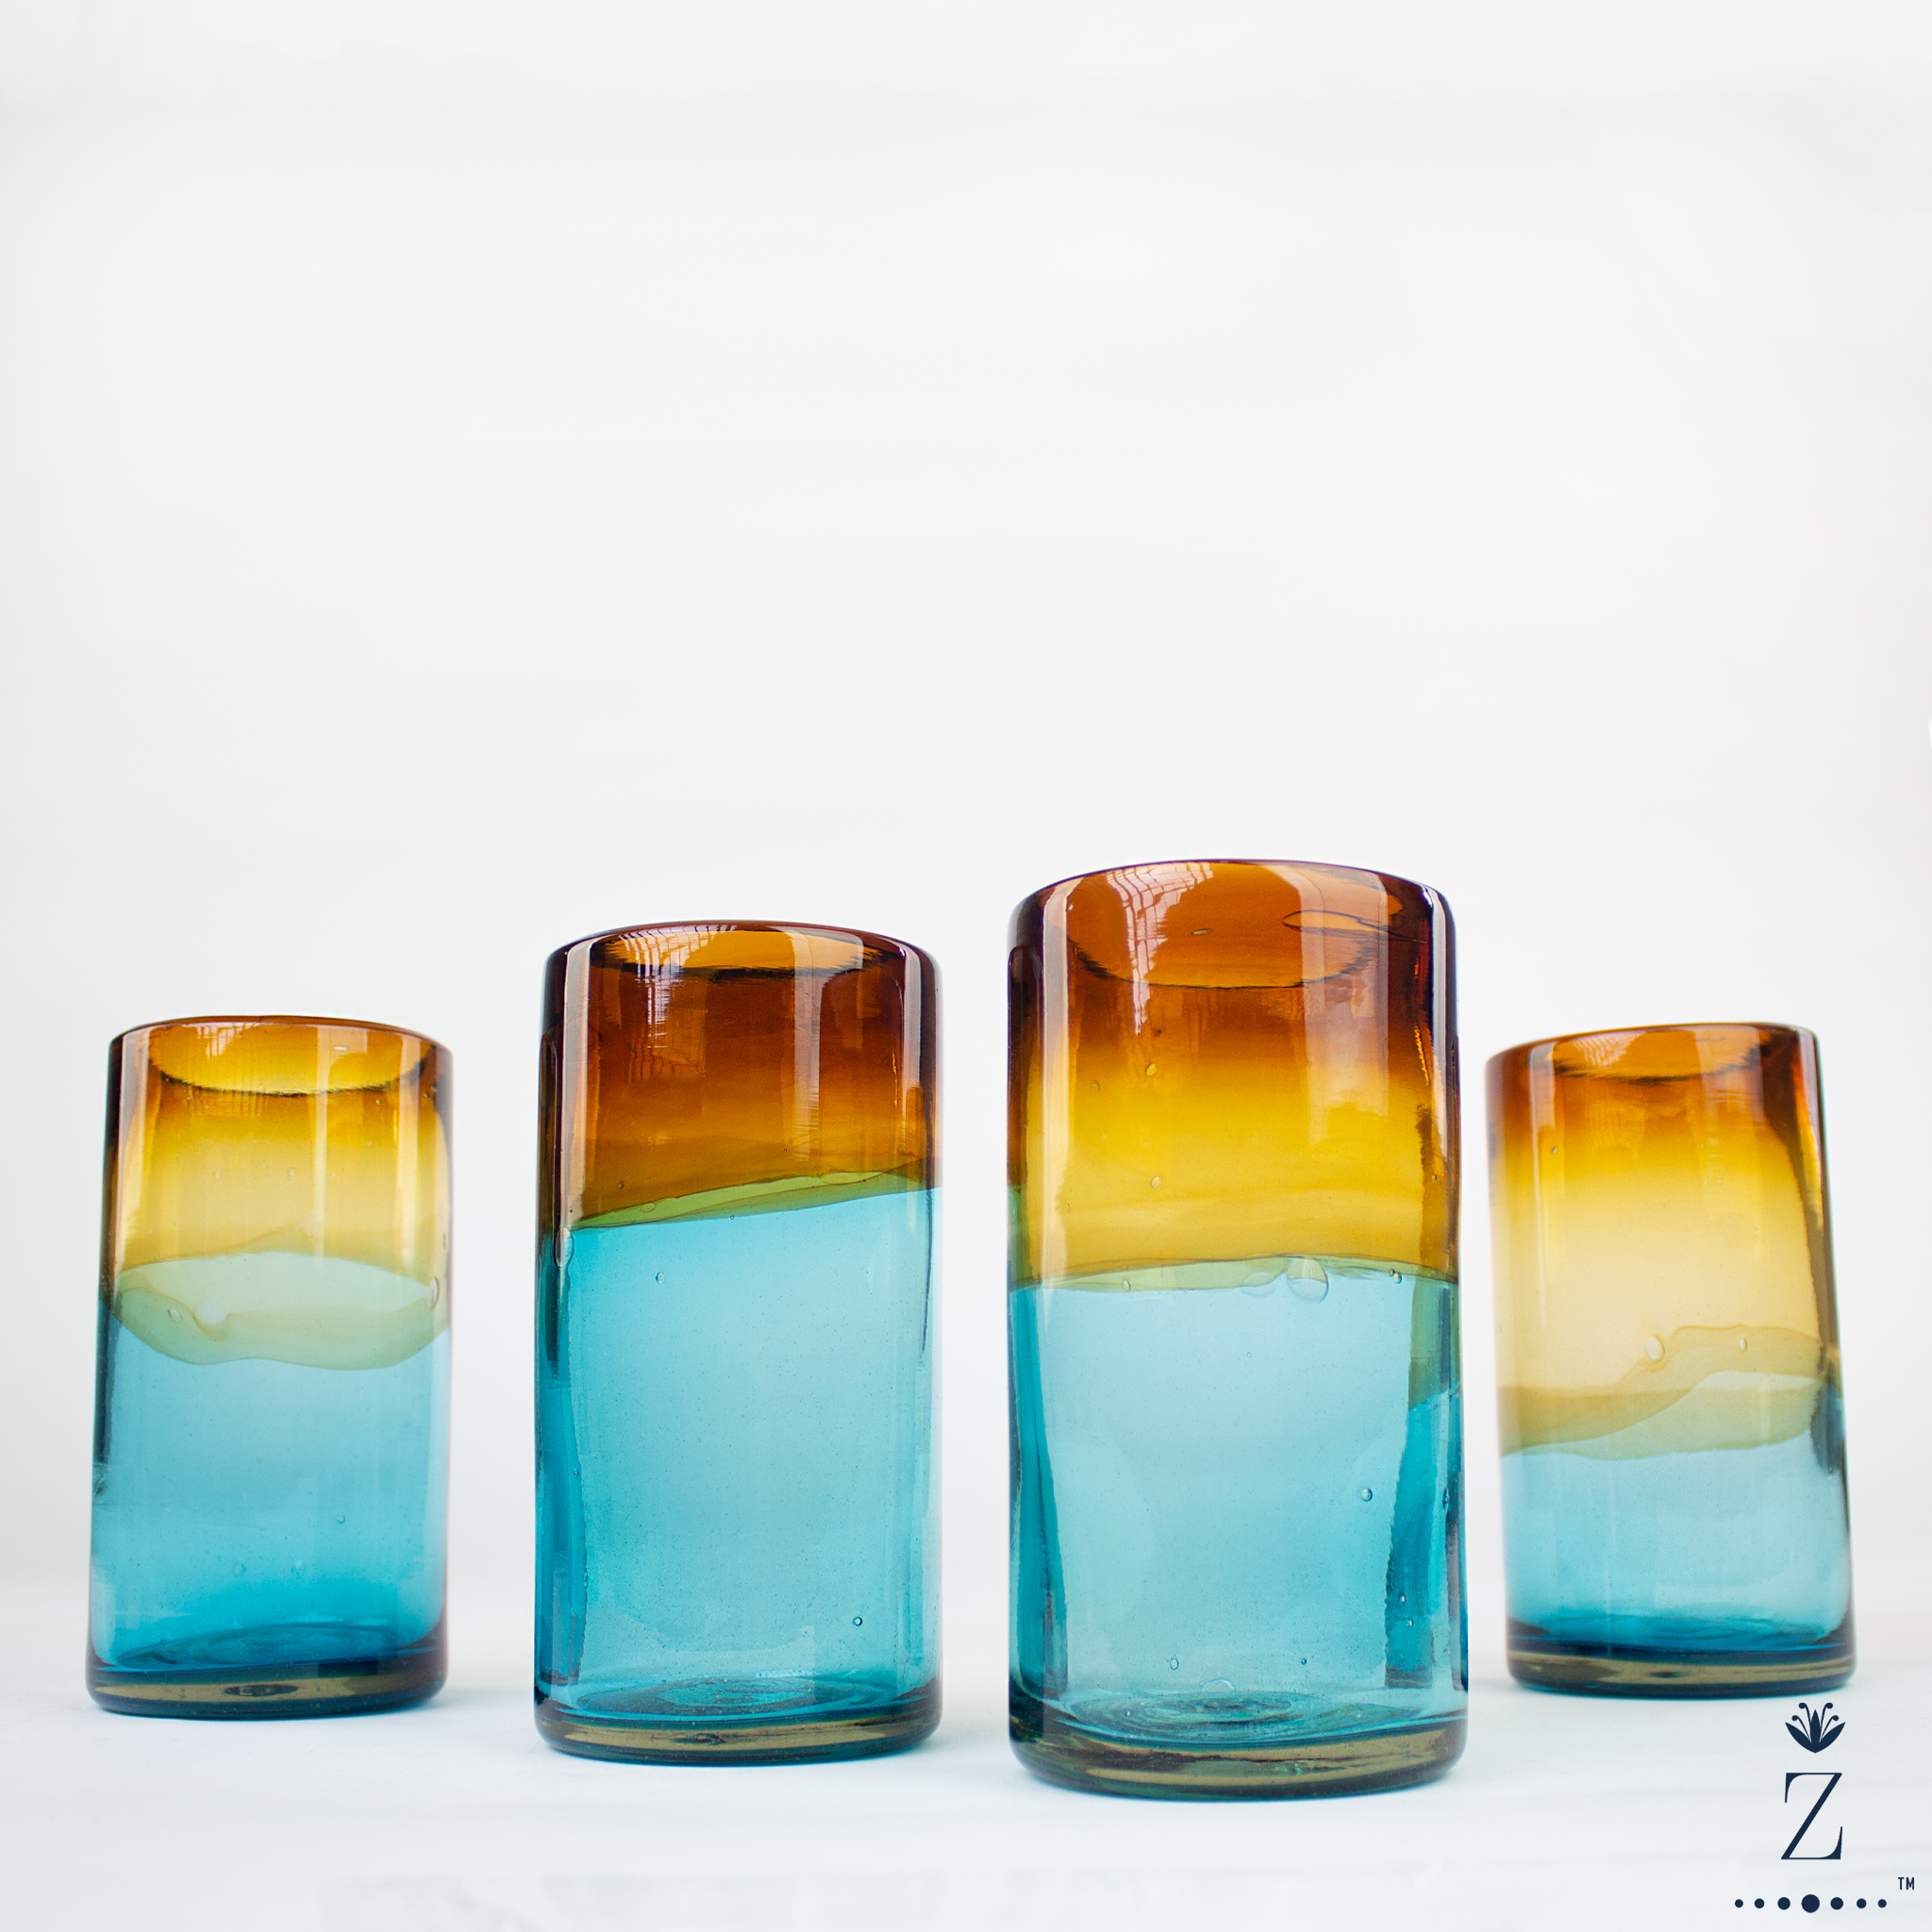 Paradise Cups - Handmade Drinking Glasses - Unique Glass Art - How